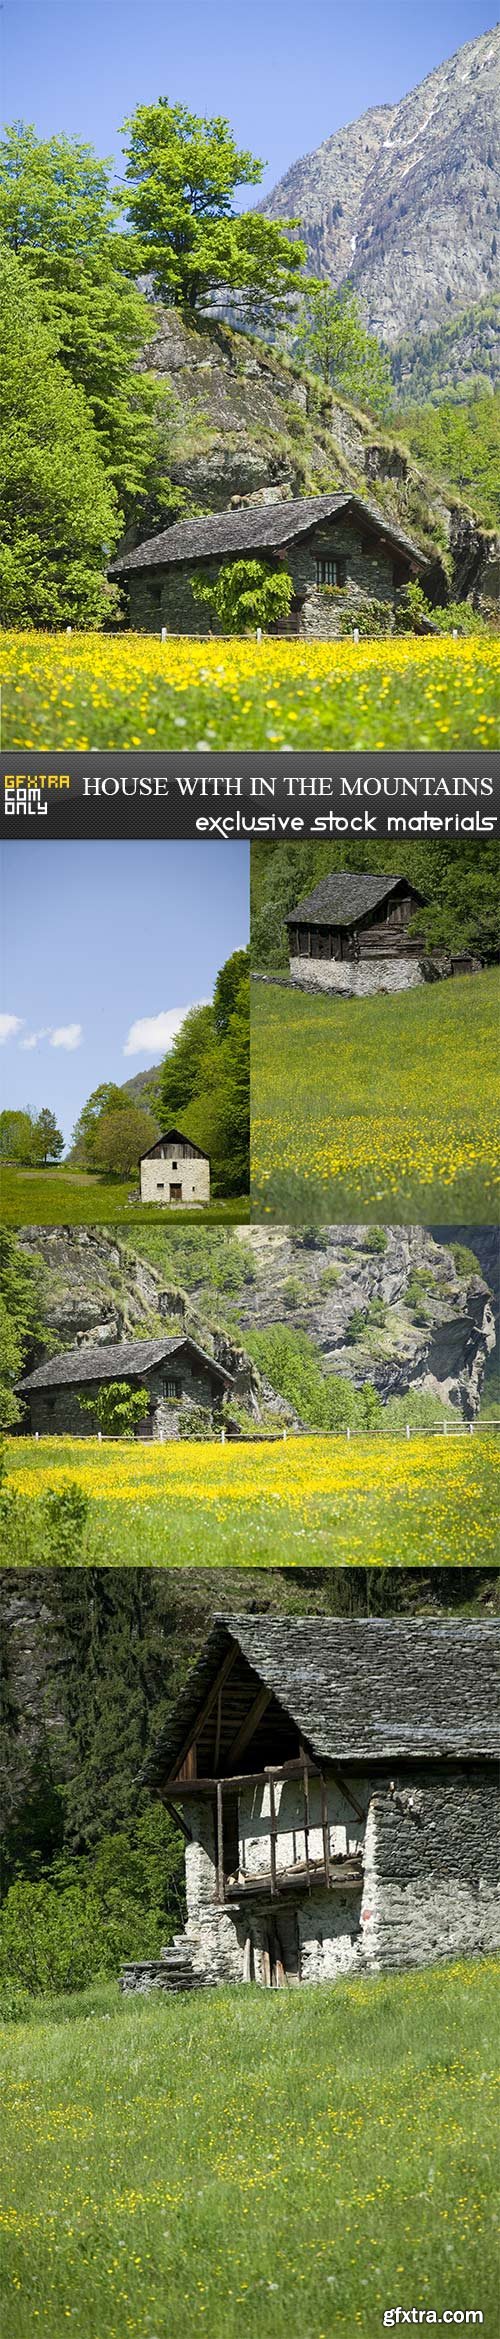 House with in the Mountains - 5 UHQ JPEG